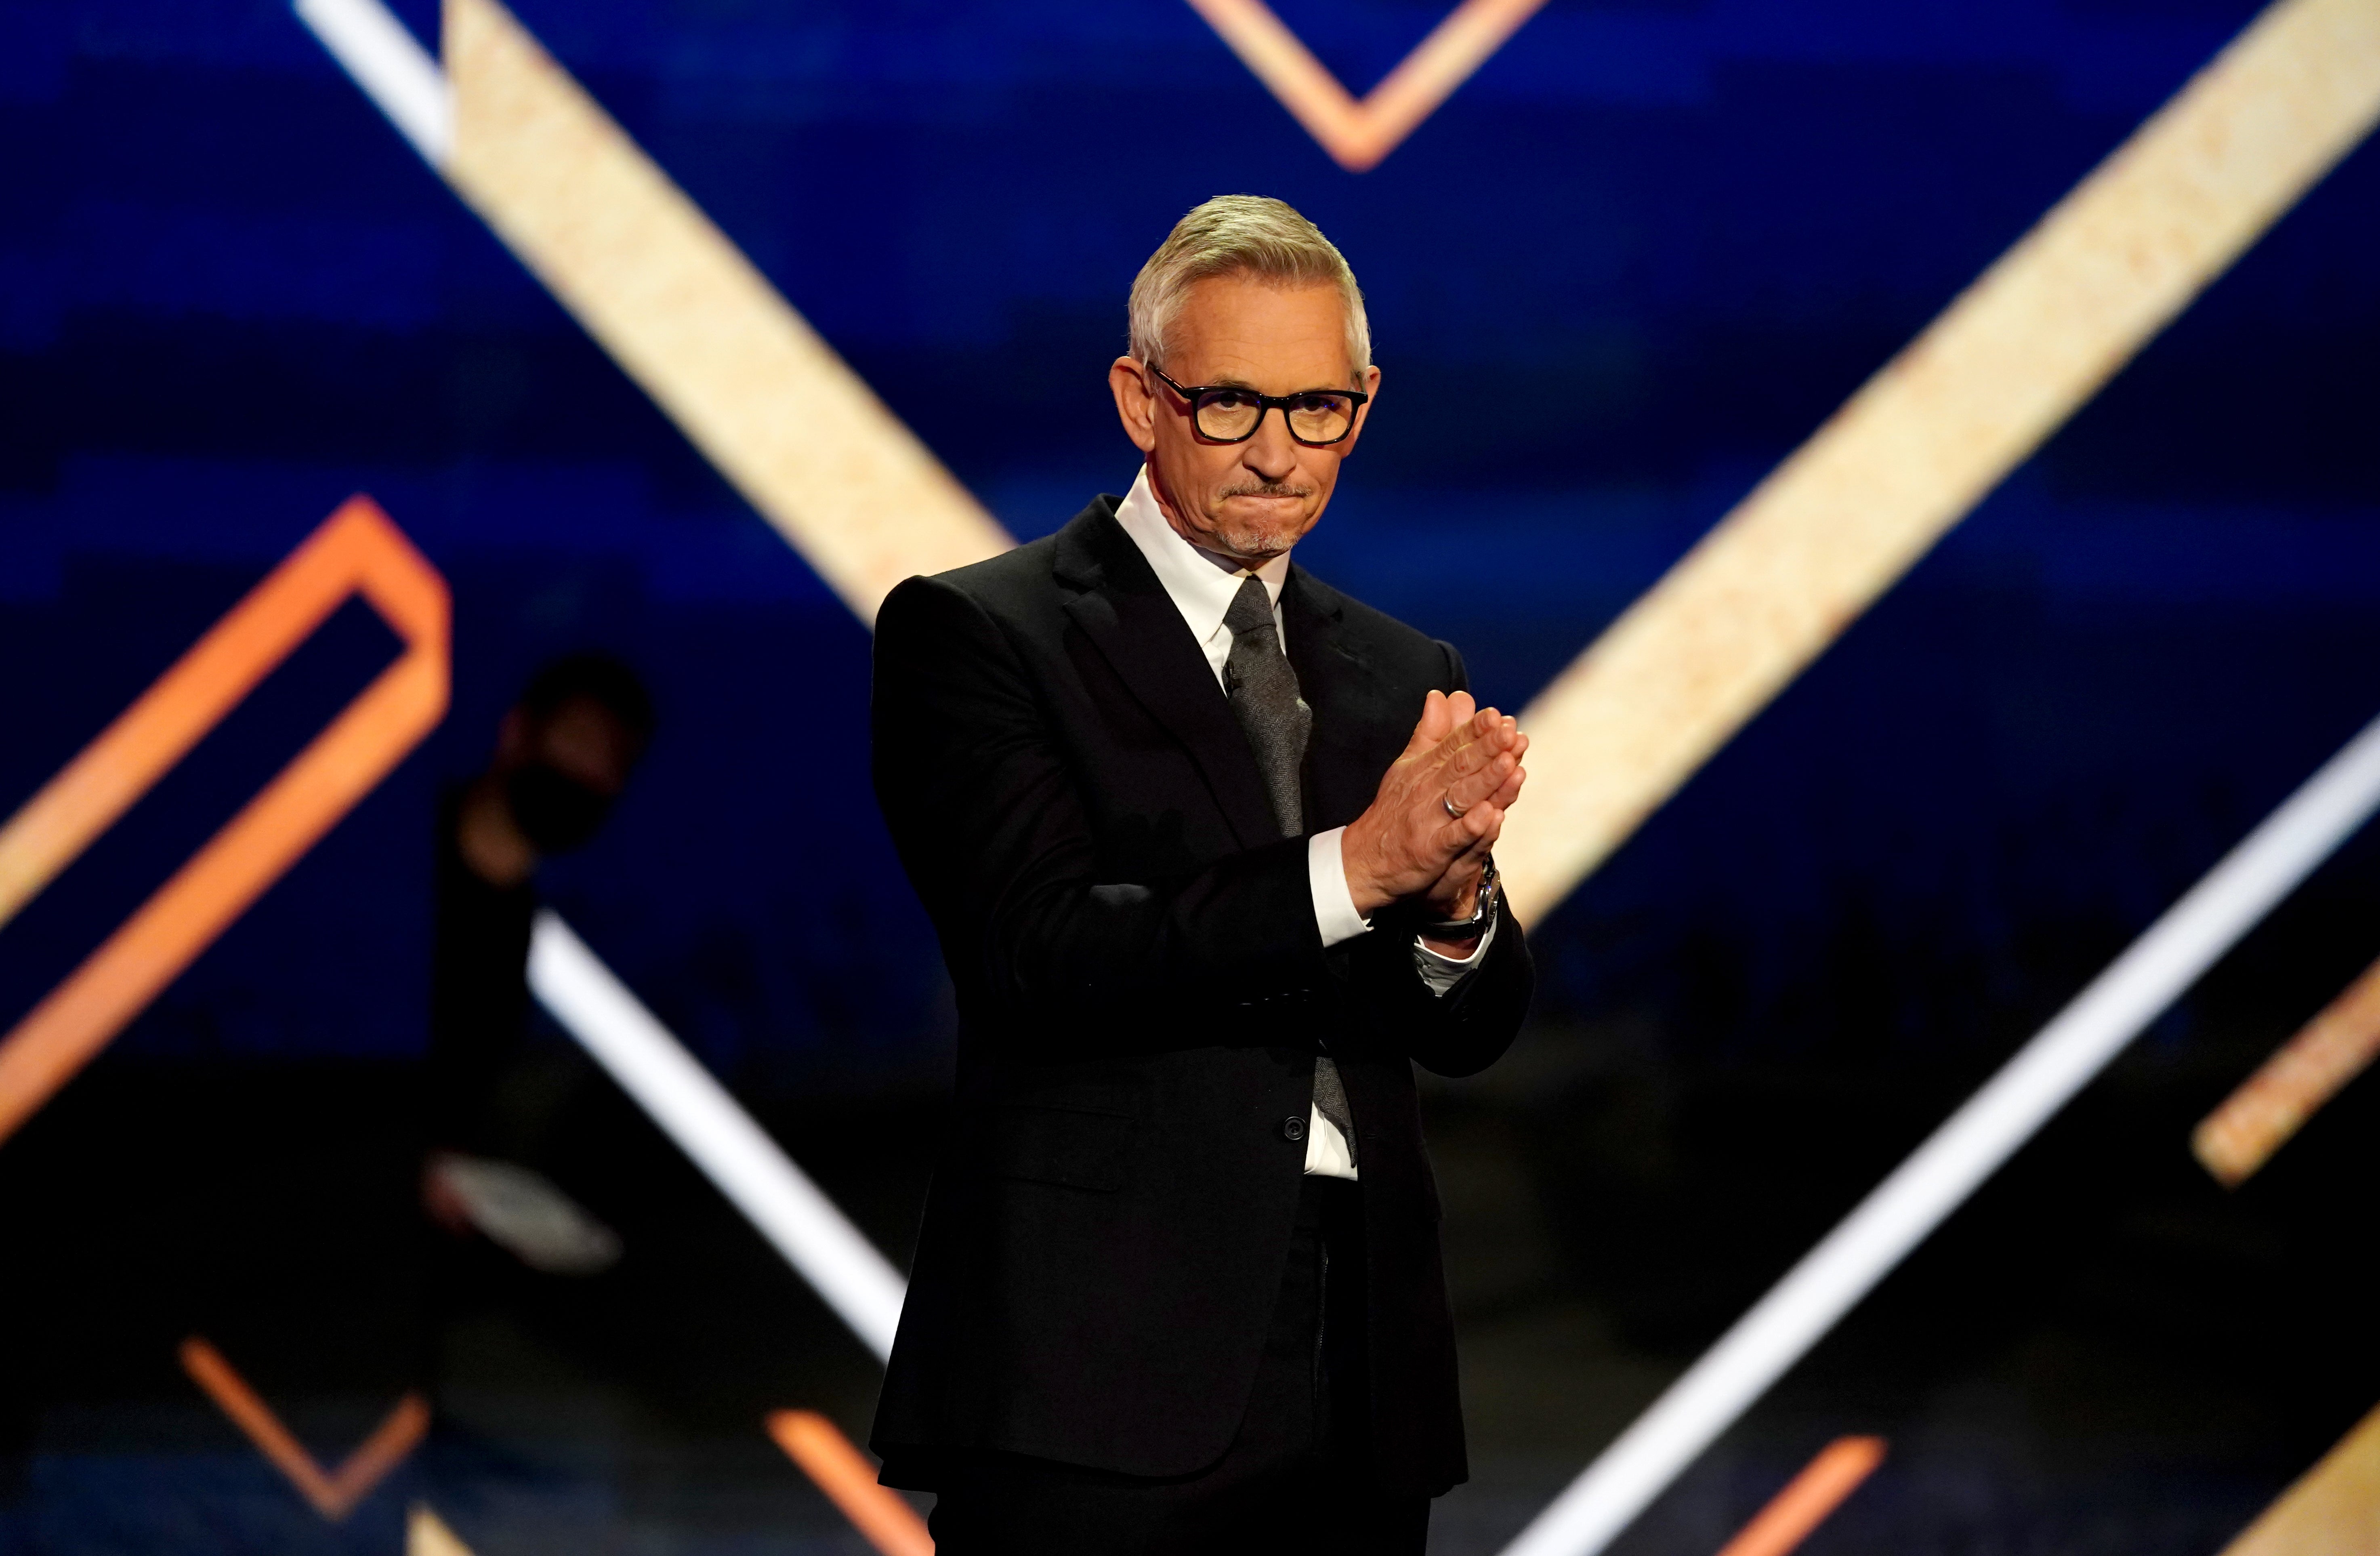 Presenter Gary Lineker on stage during the BBC Sports Personality of the Year Awards 2021 at MediaCityUK, Salford (David Davies/PA)